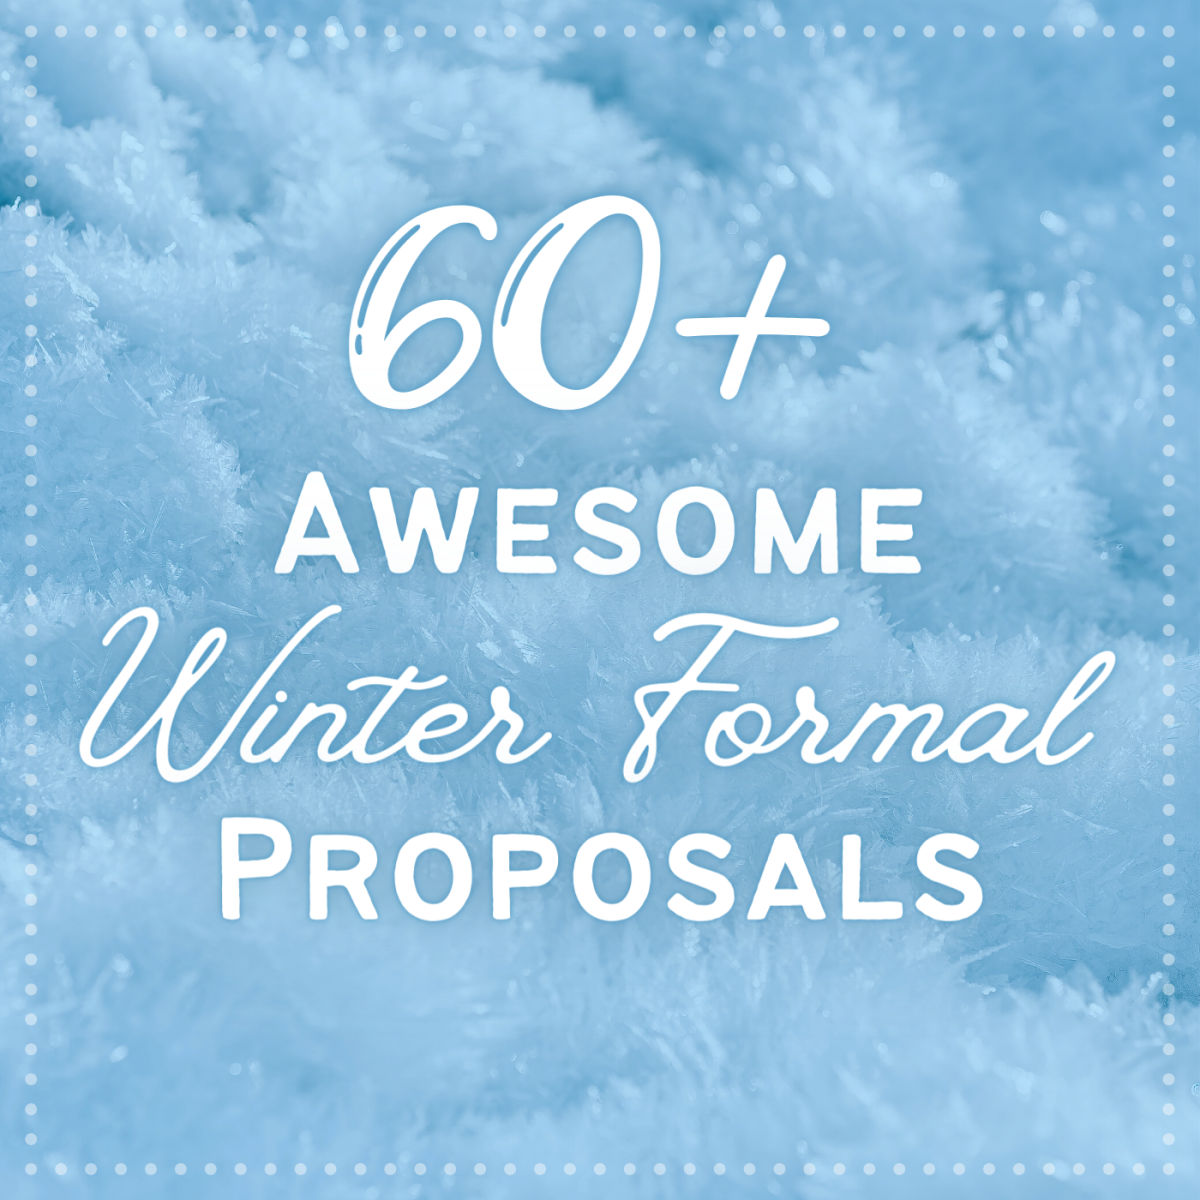 If you need an idea for a Winter Formal proposal, check out these great ideas!